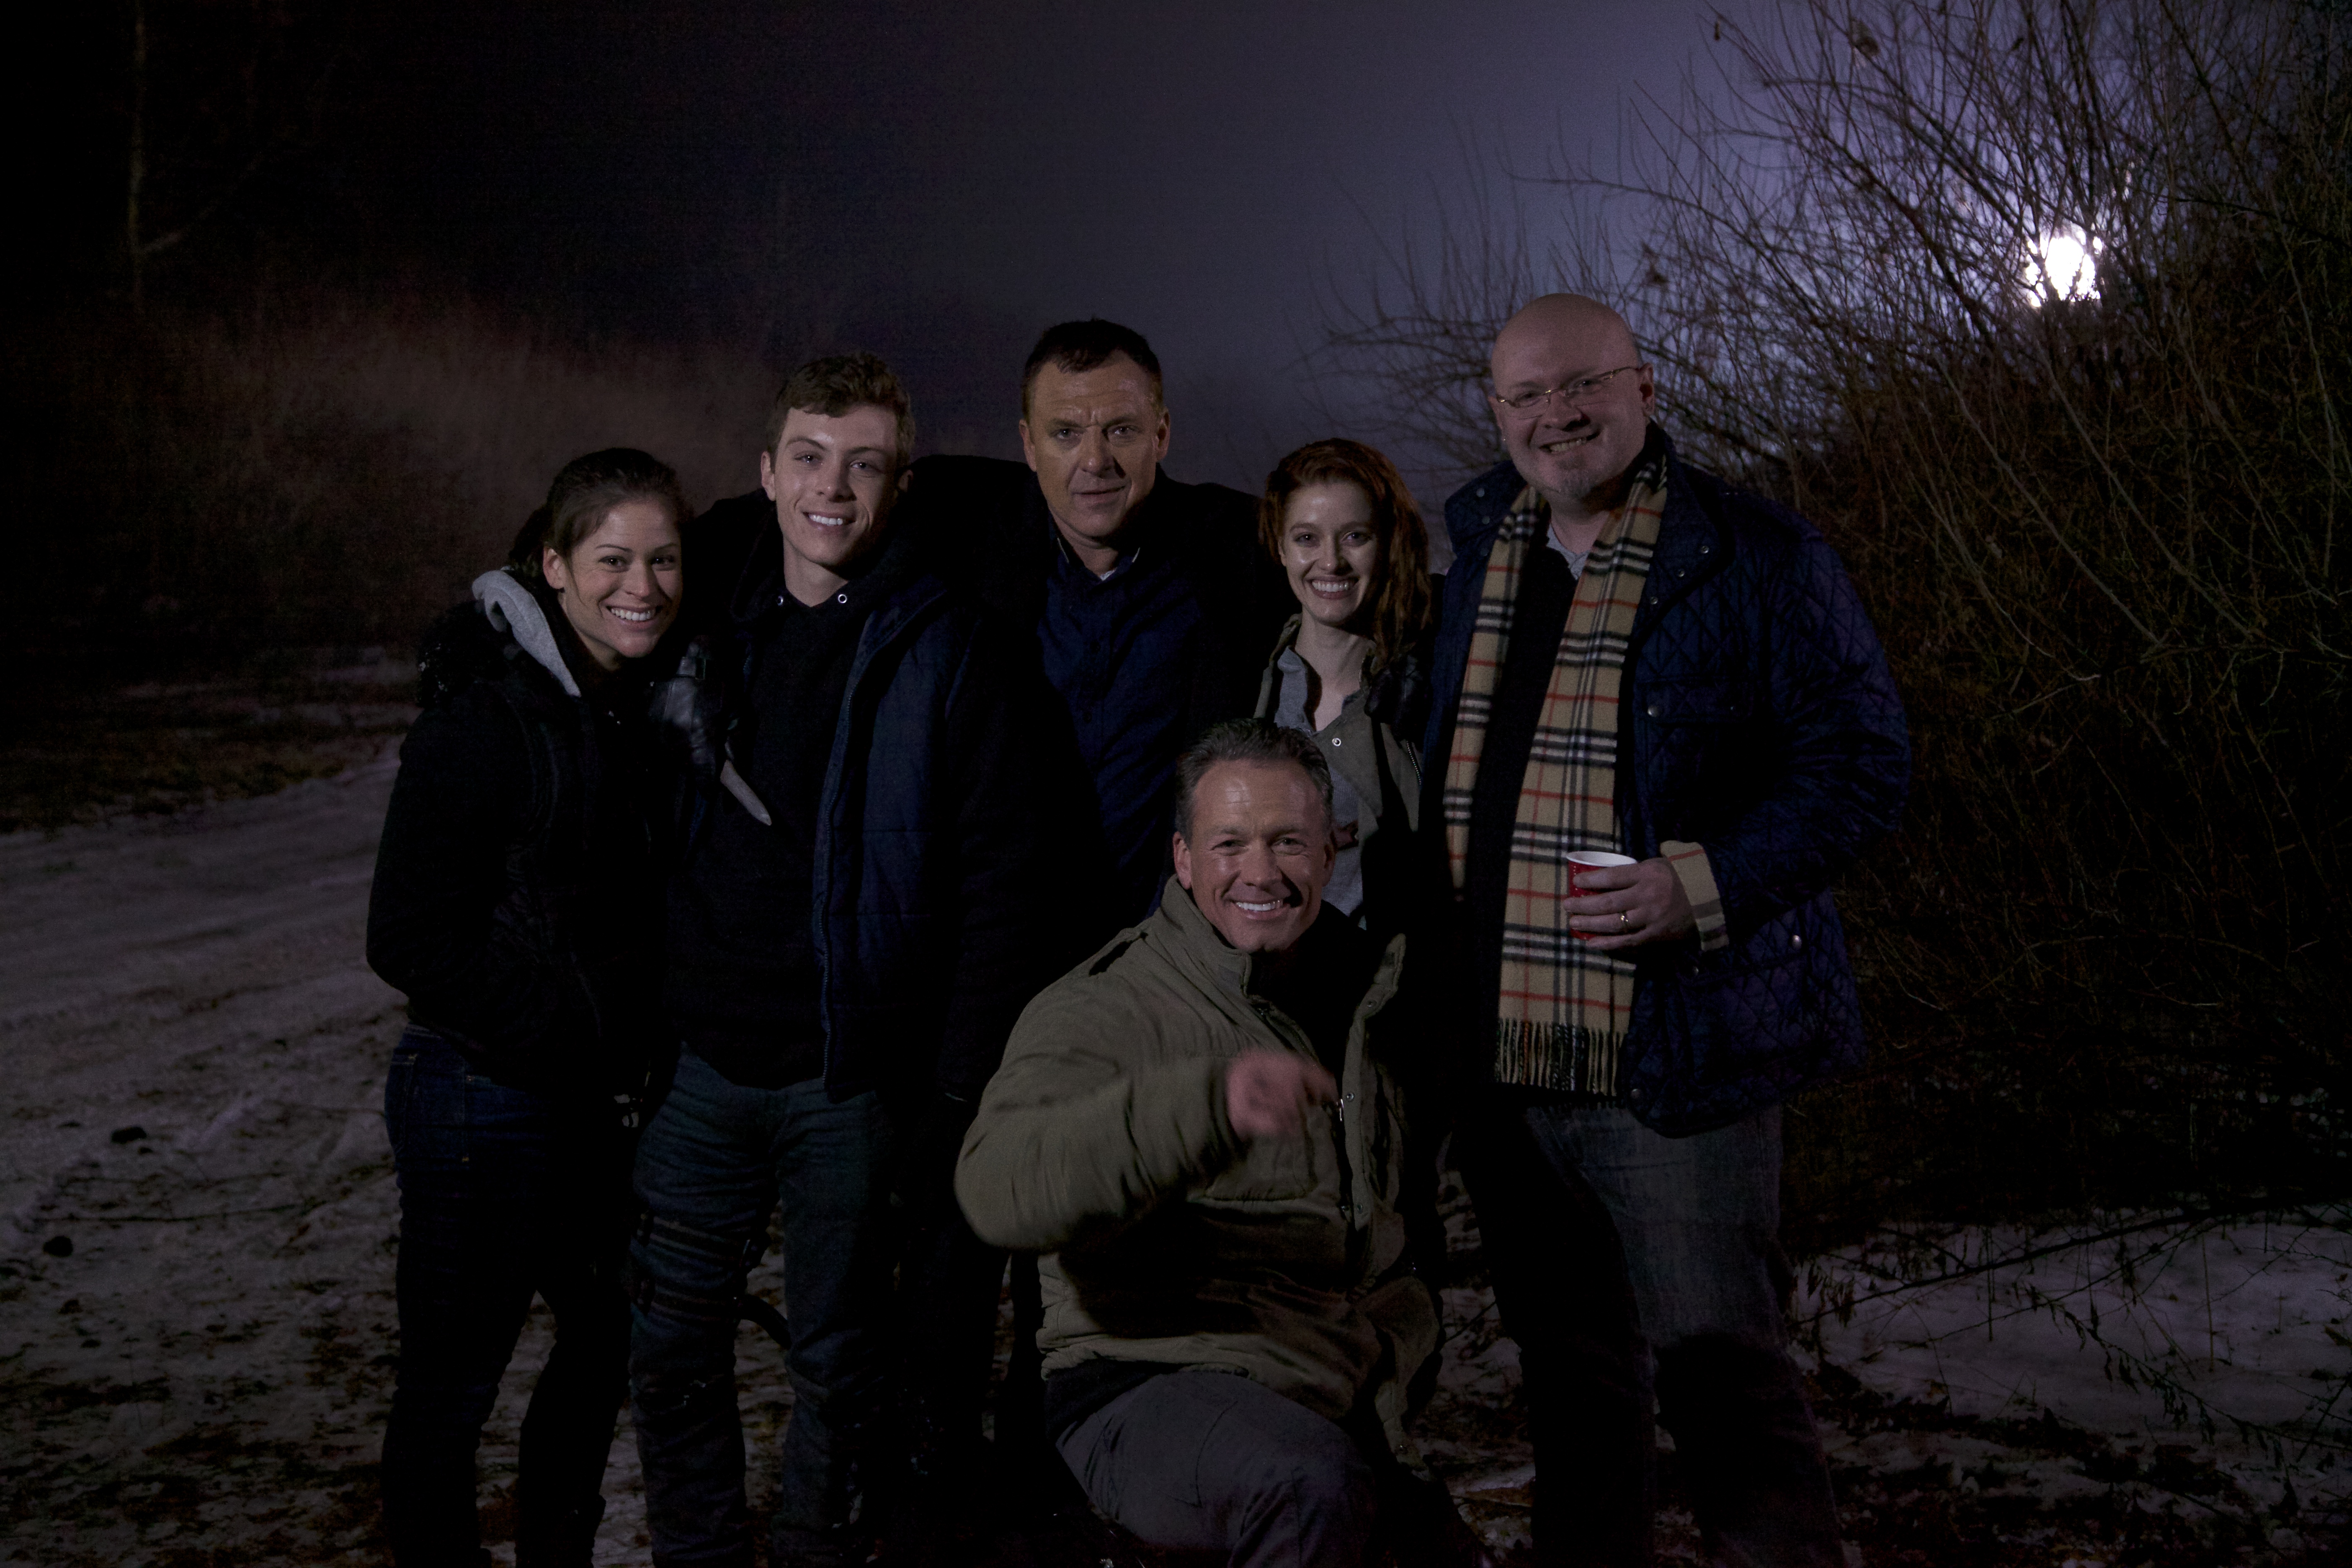 On the set of Dark Haul with Tom Sizemore, Rick Ravanello, Evalena Marie, Anthony Del Negro, and Adrienne LaValley.